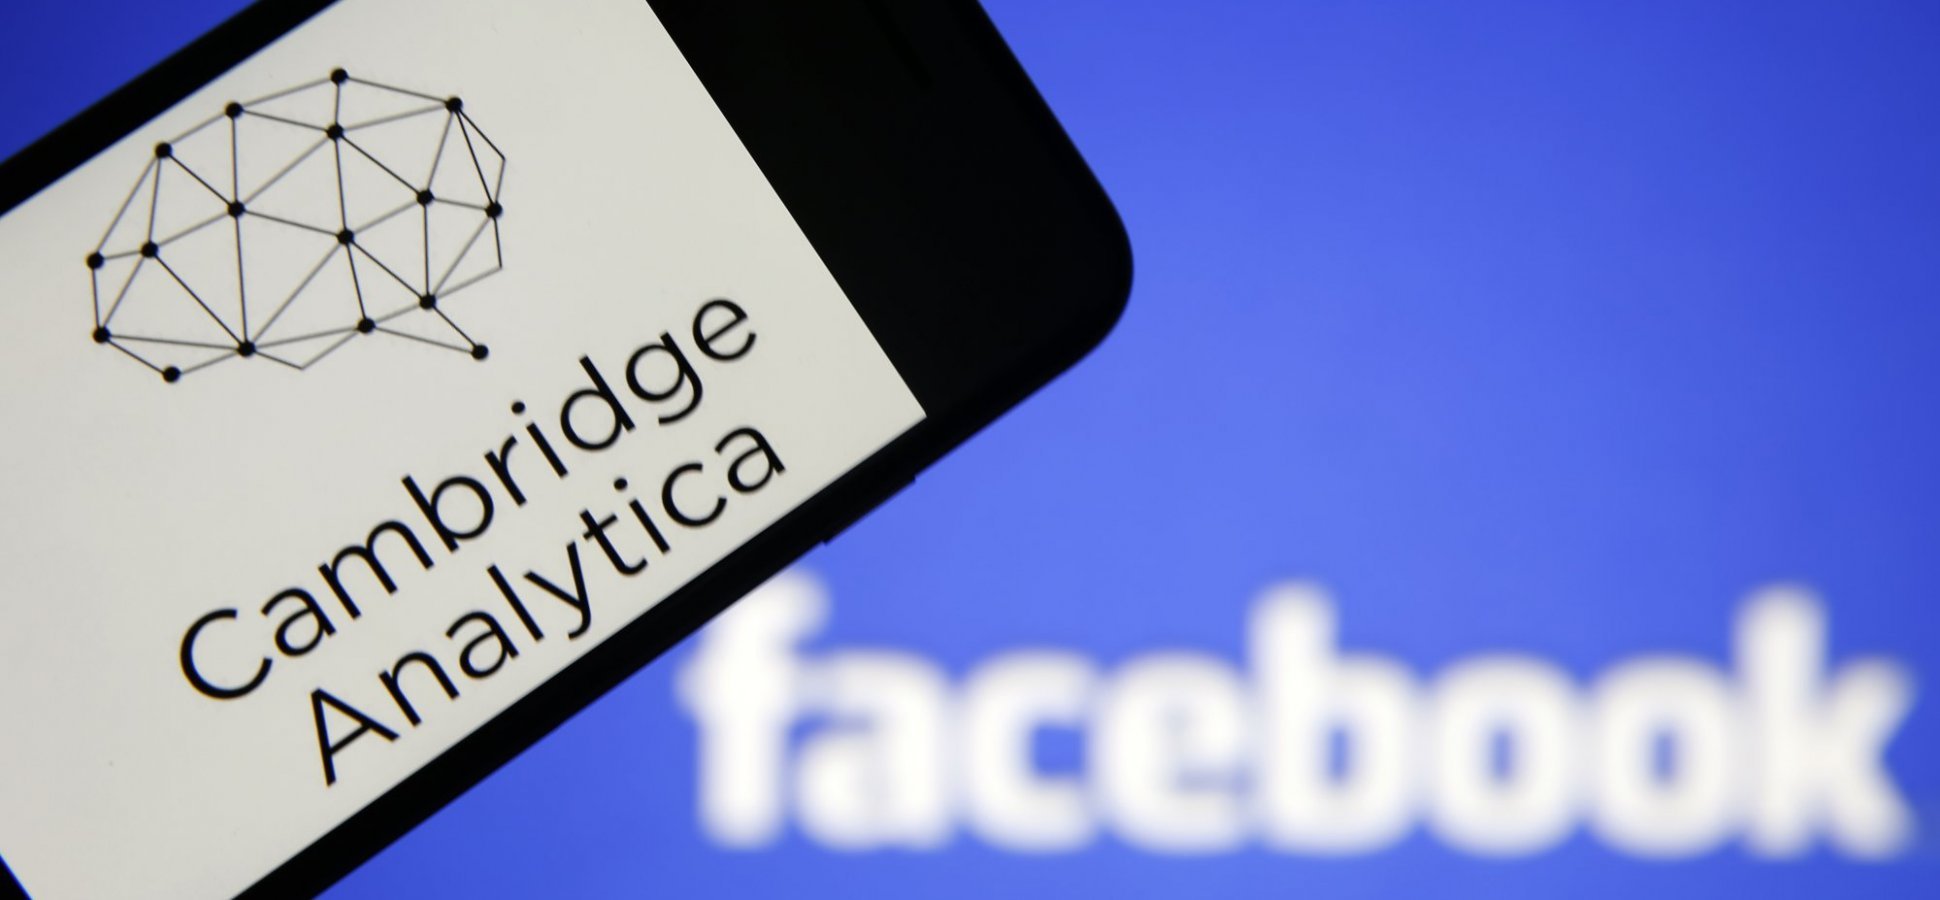 Facebook suspends tens of thousands of apps in response to Cambridge Analytica row